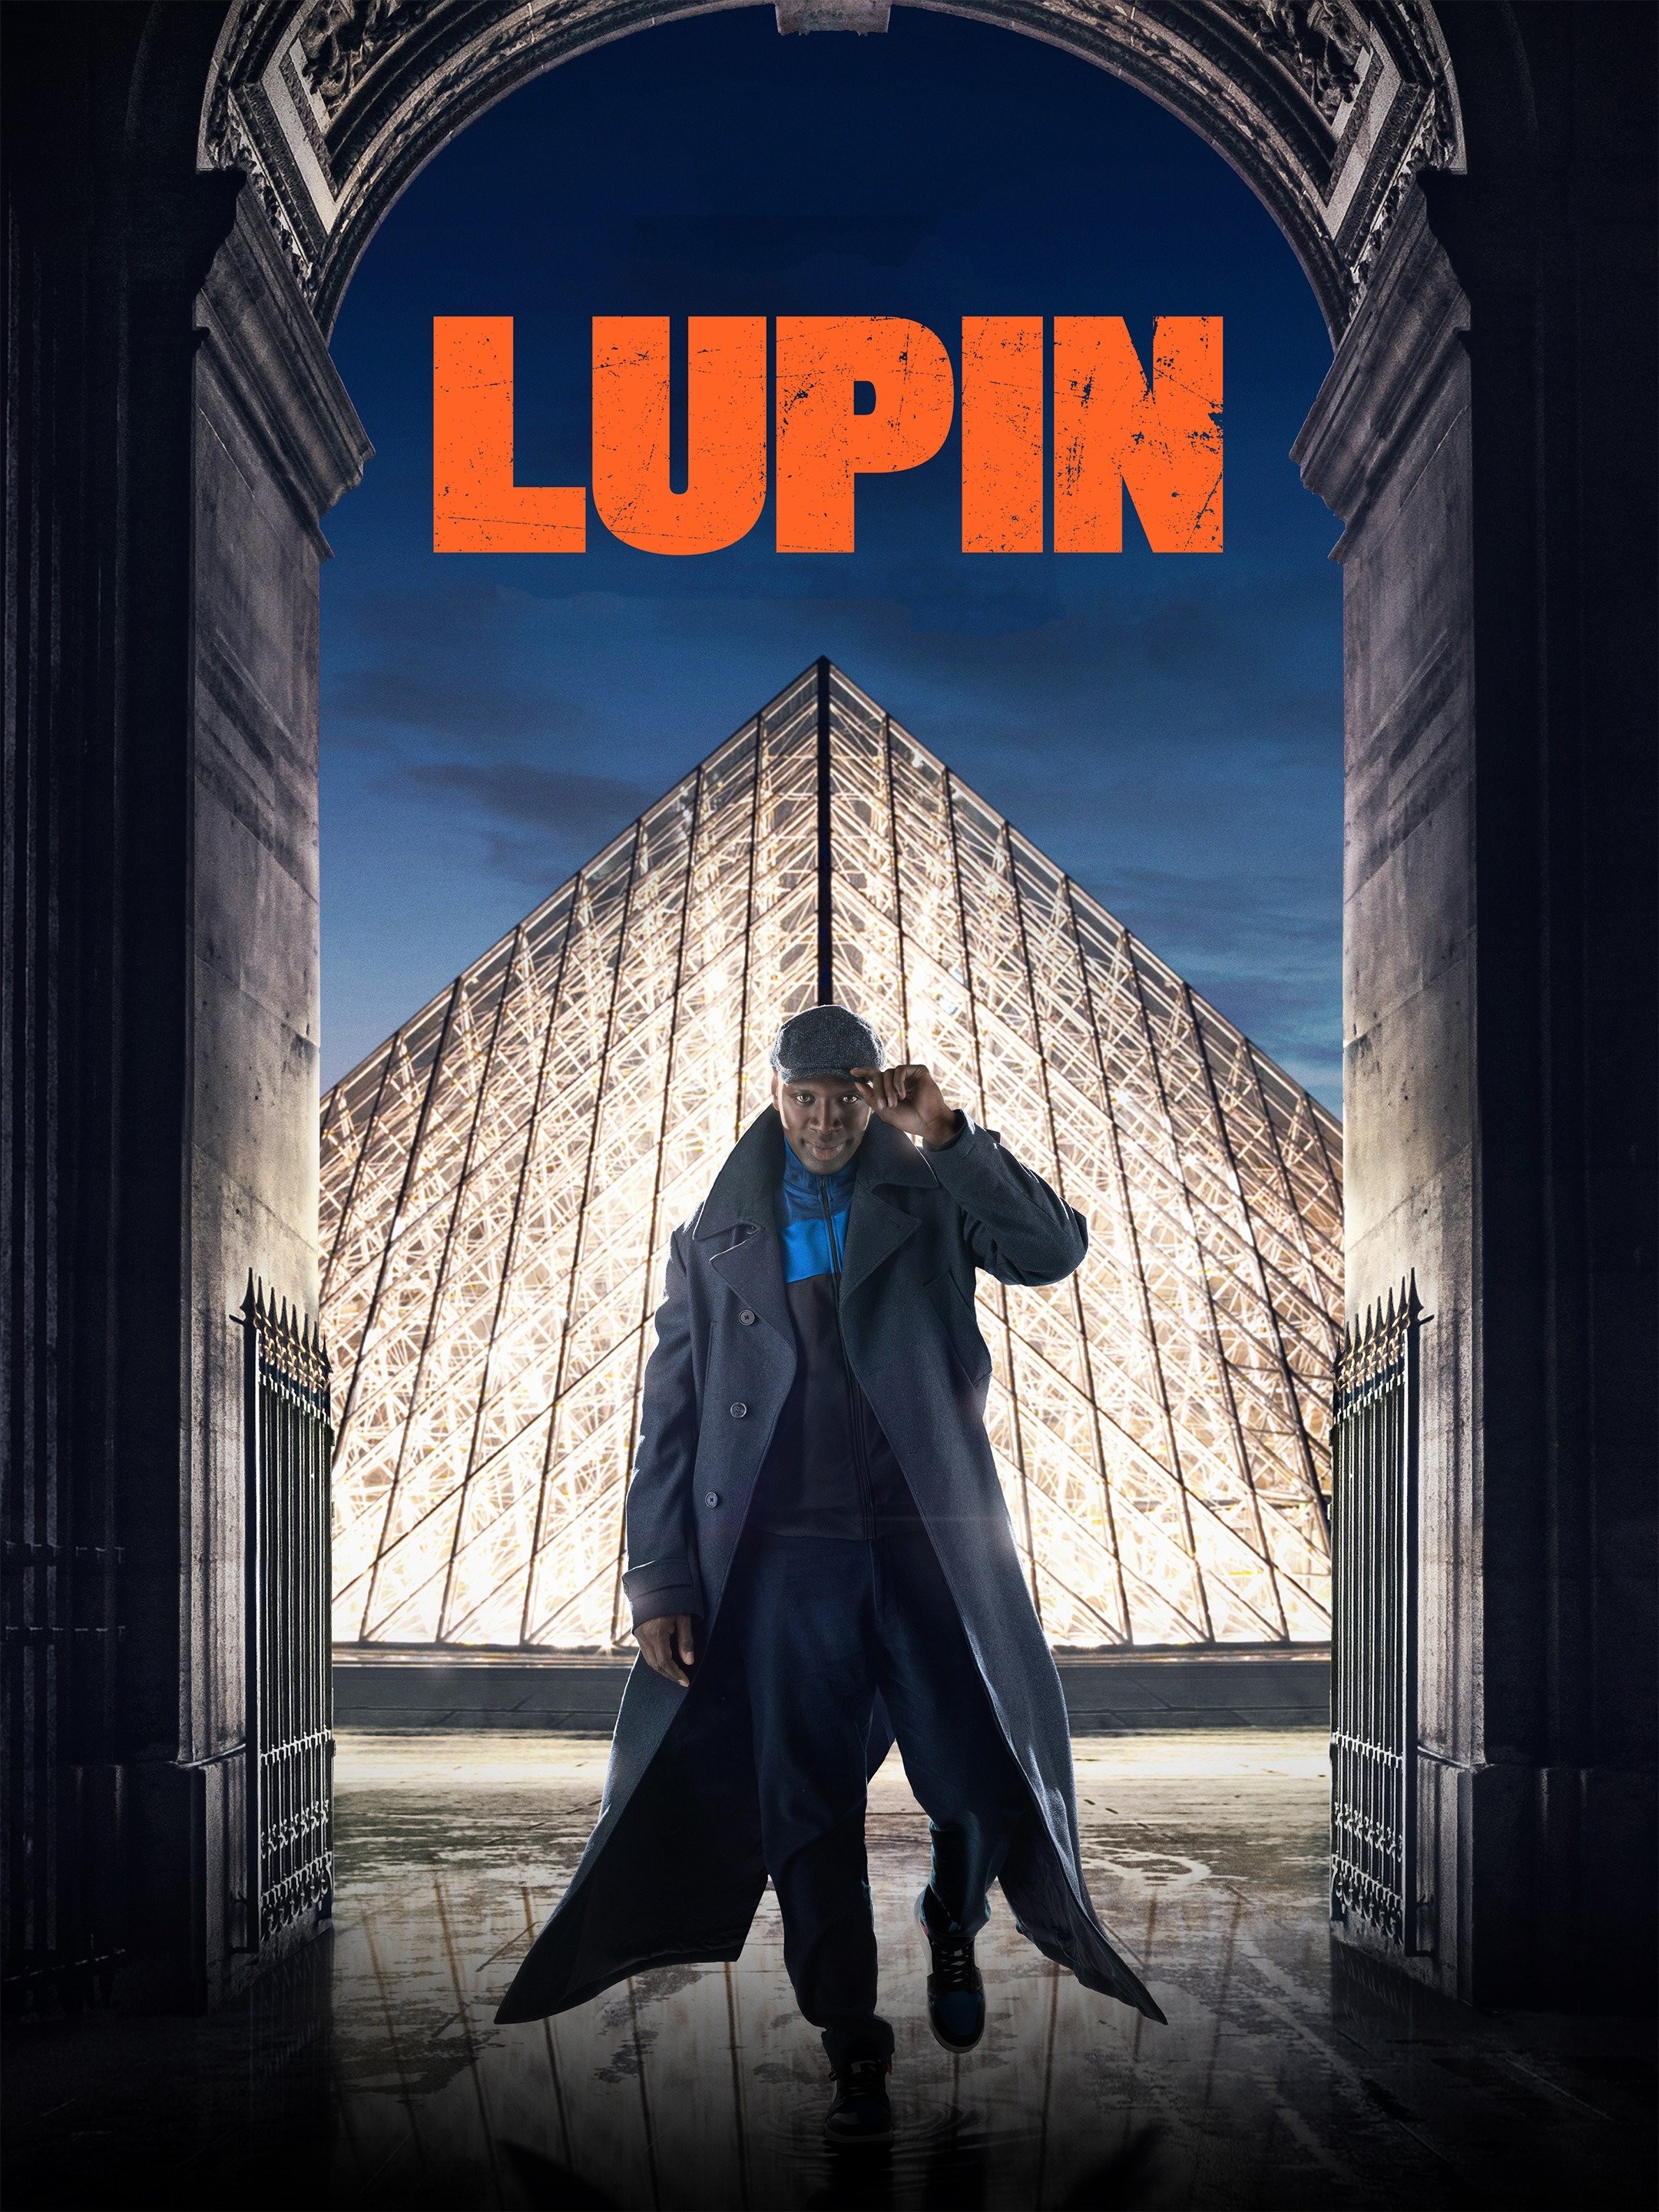 Lupin season 4 release date, cast, plot and everything you need to know